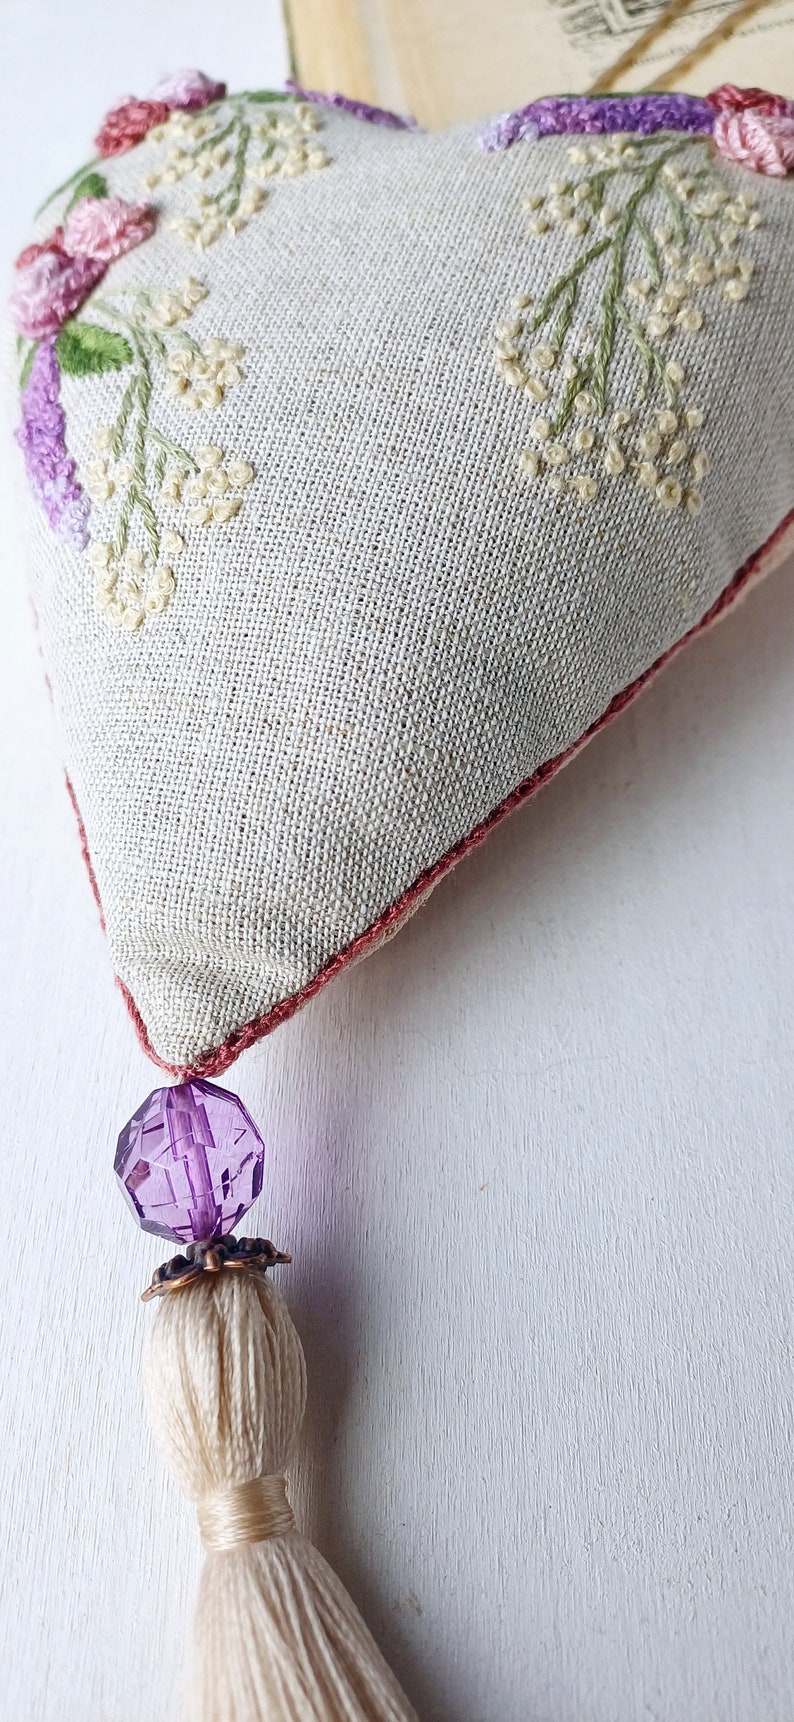 Handmade embroidered linen heart shaped home decor sachet, with hanging loop and tassel.